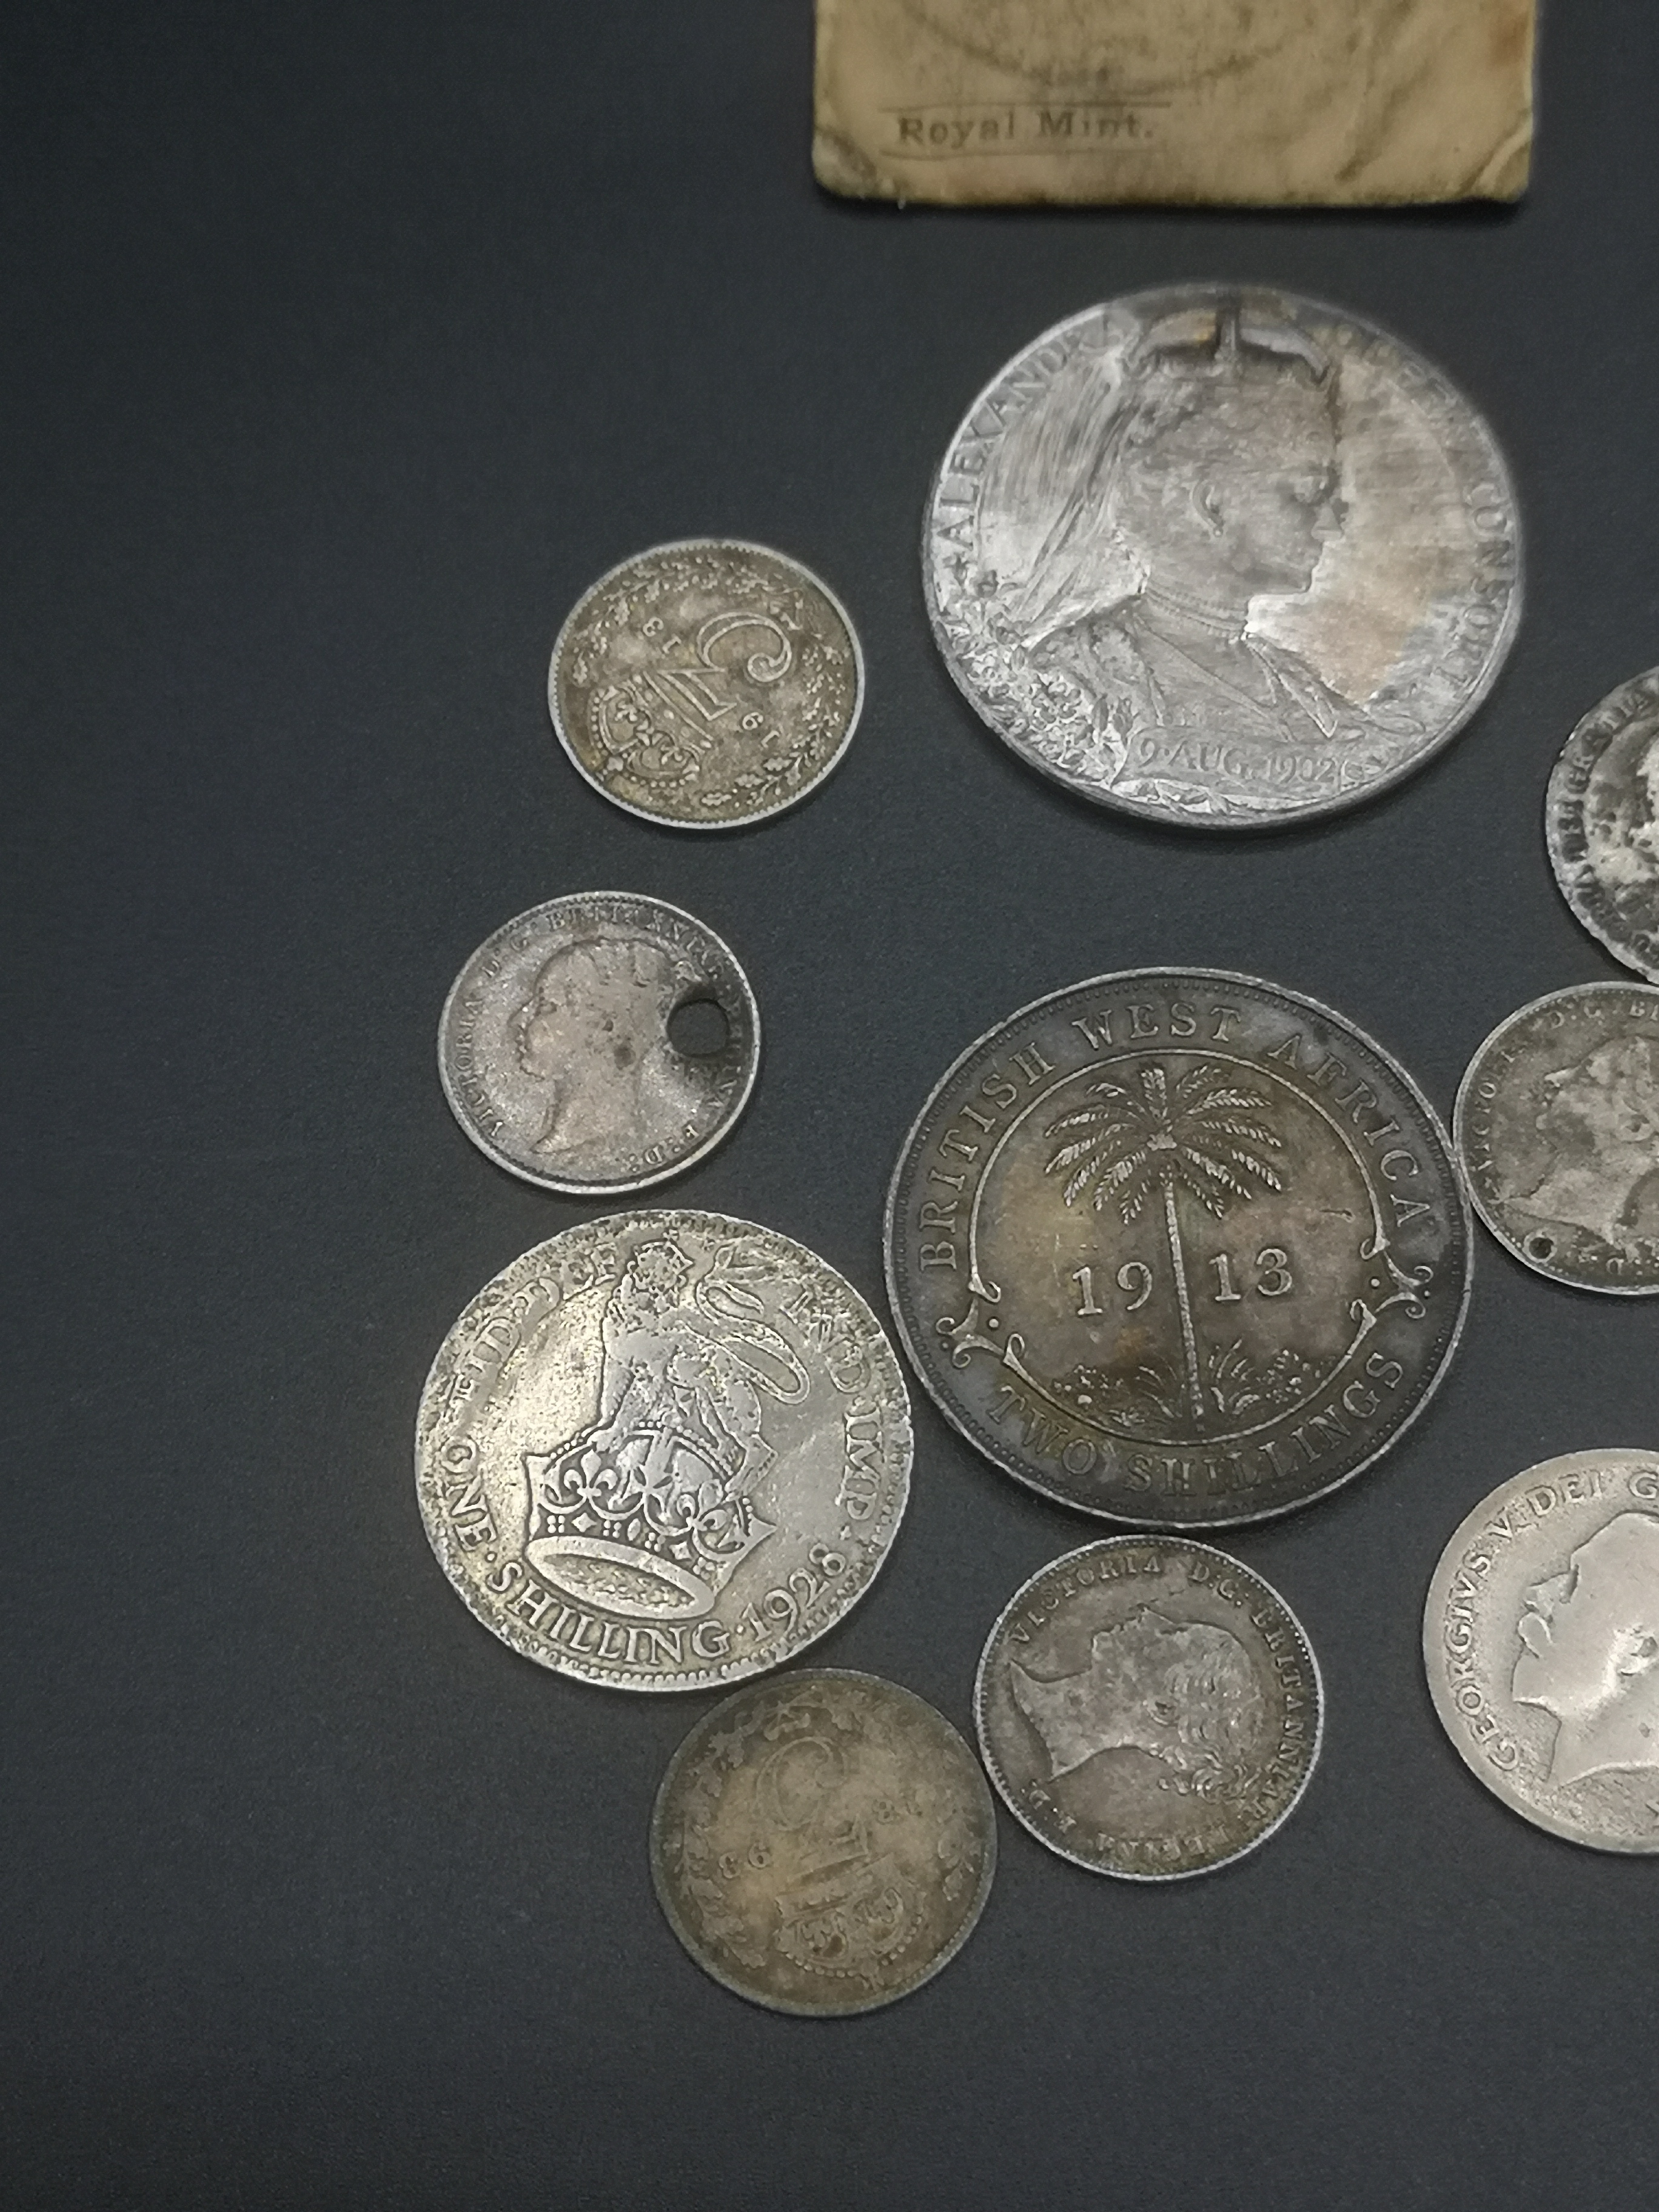 A collection of Victorian, Edwardian, and Georgian silver coins and a medal - Image 4 of 6